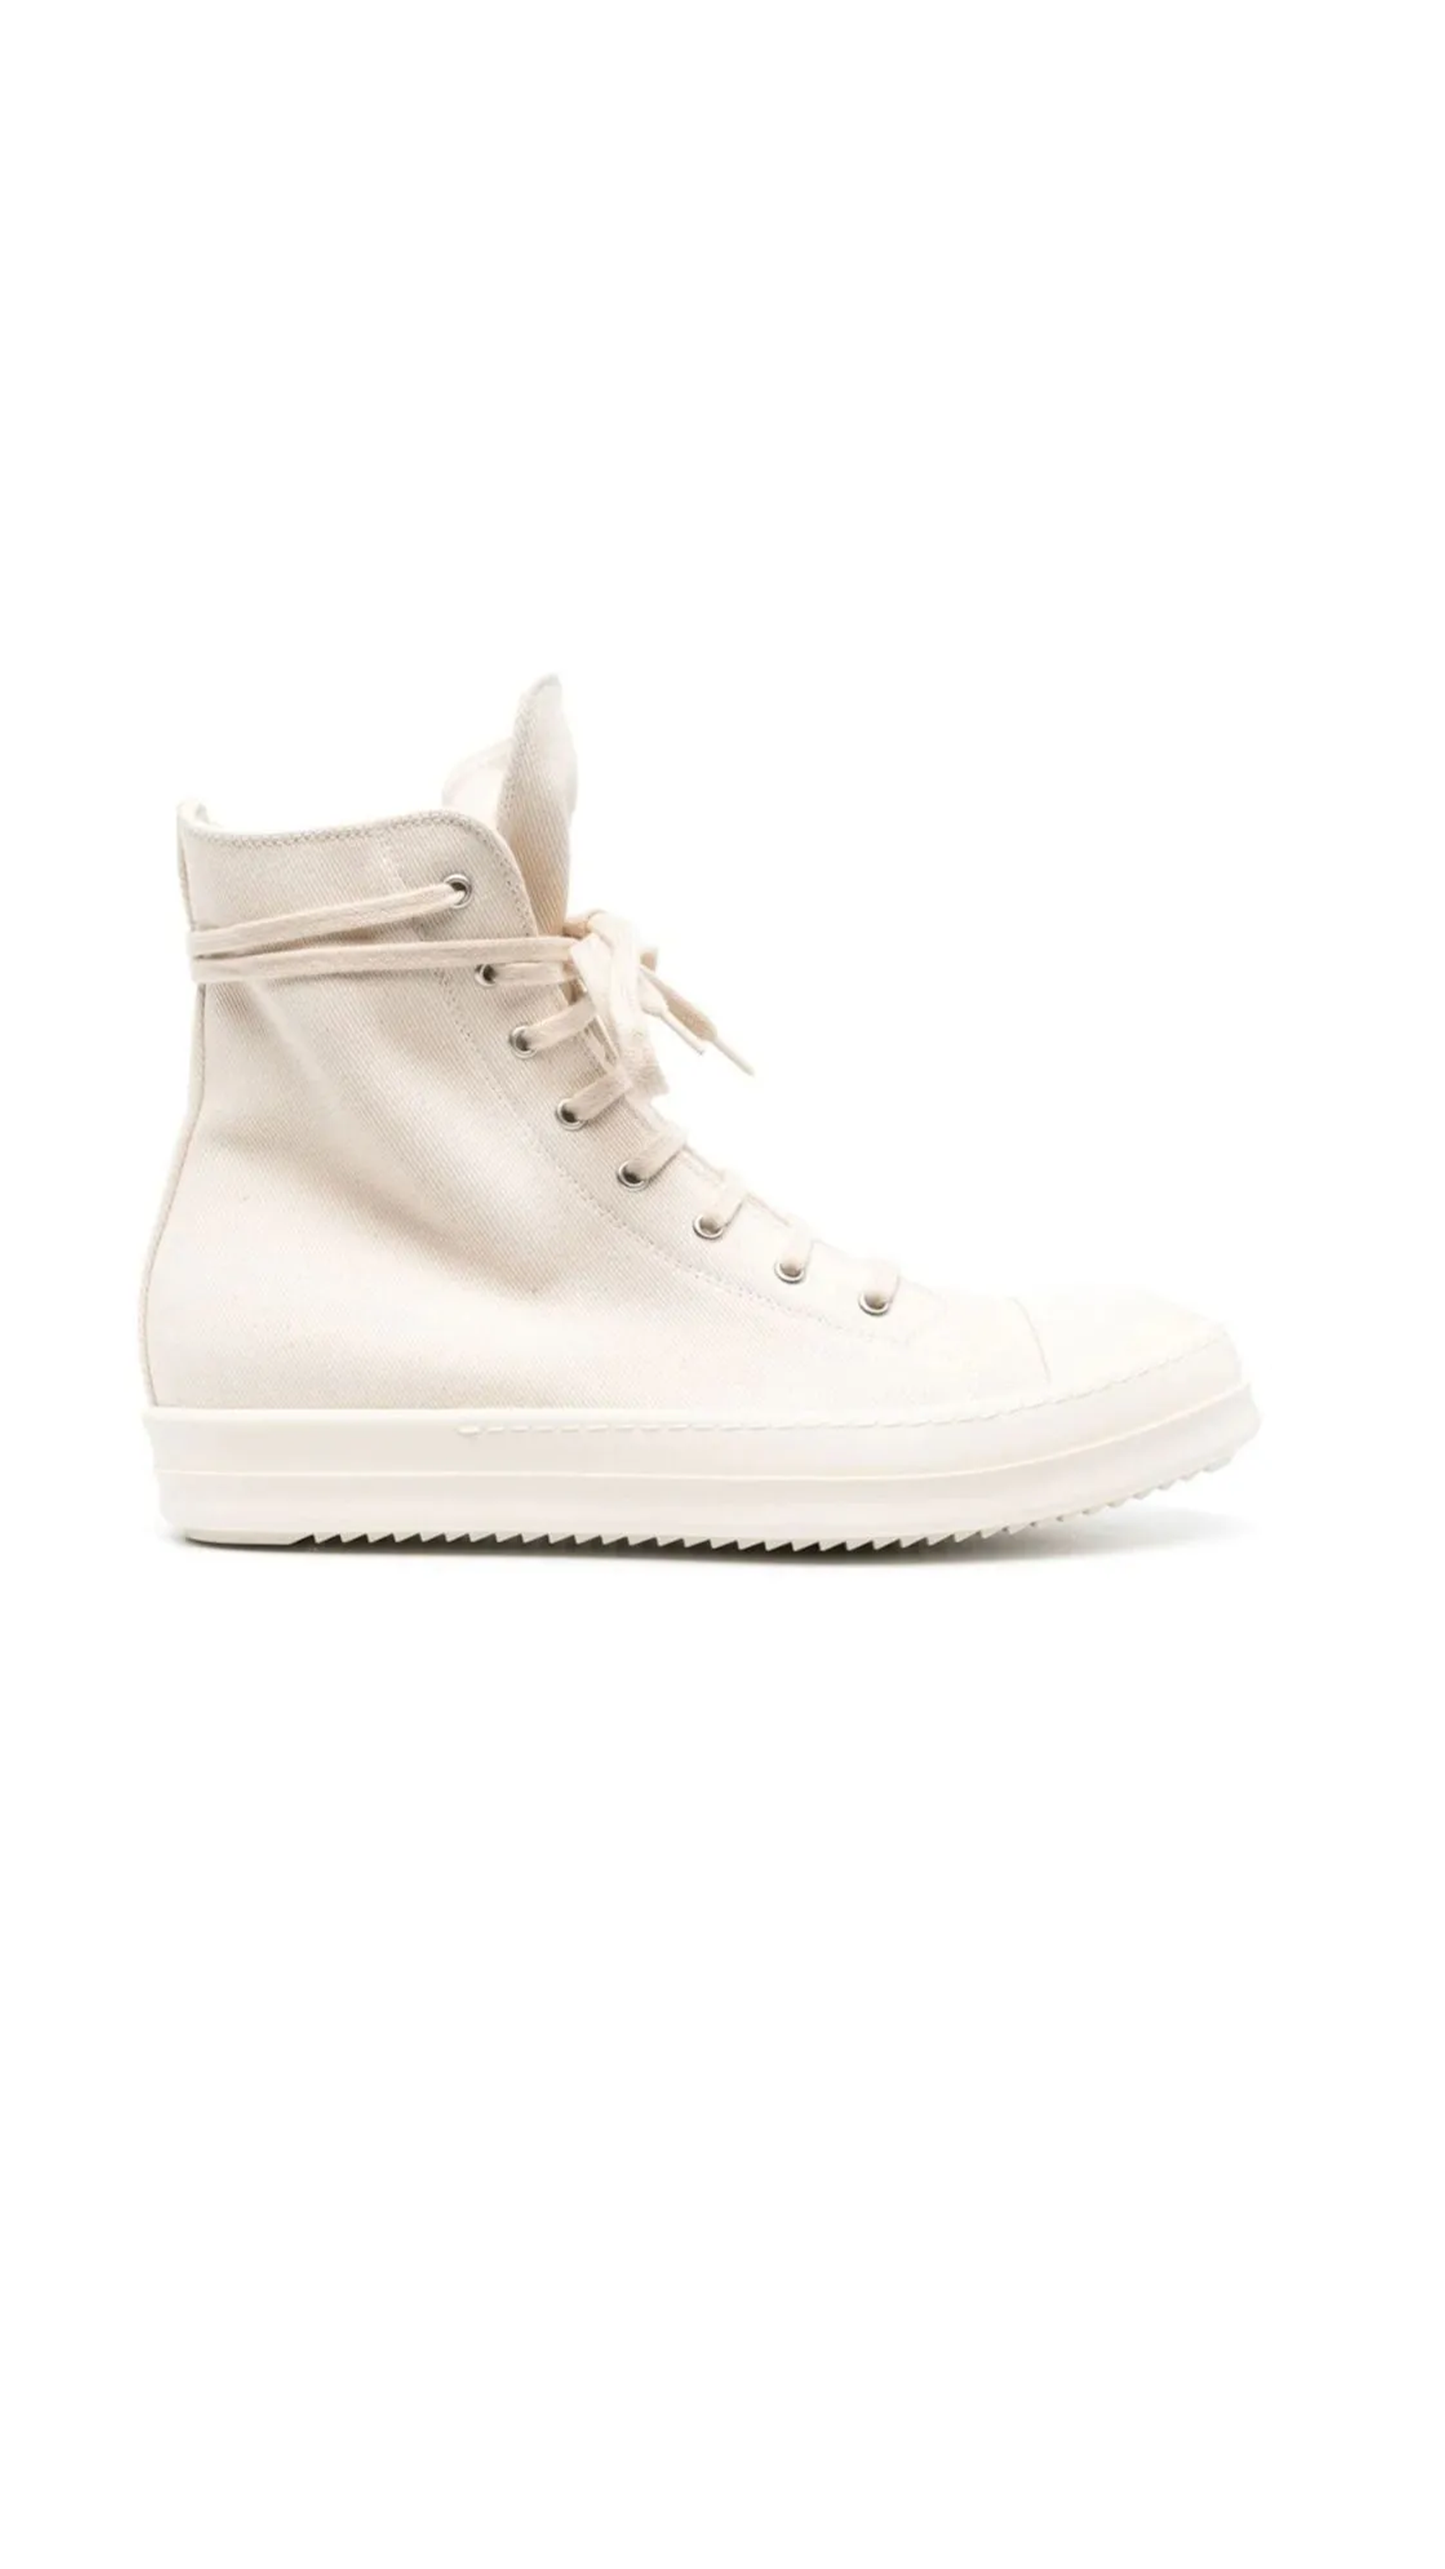 Rick Owens Drkshdw White High Top Sneakers - White